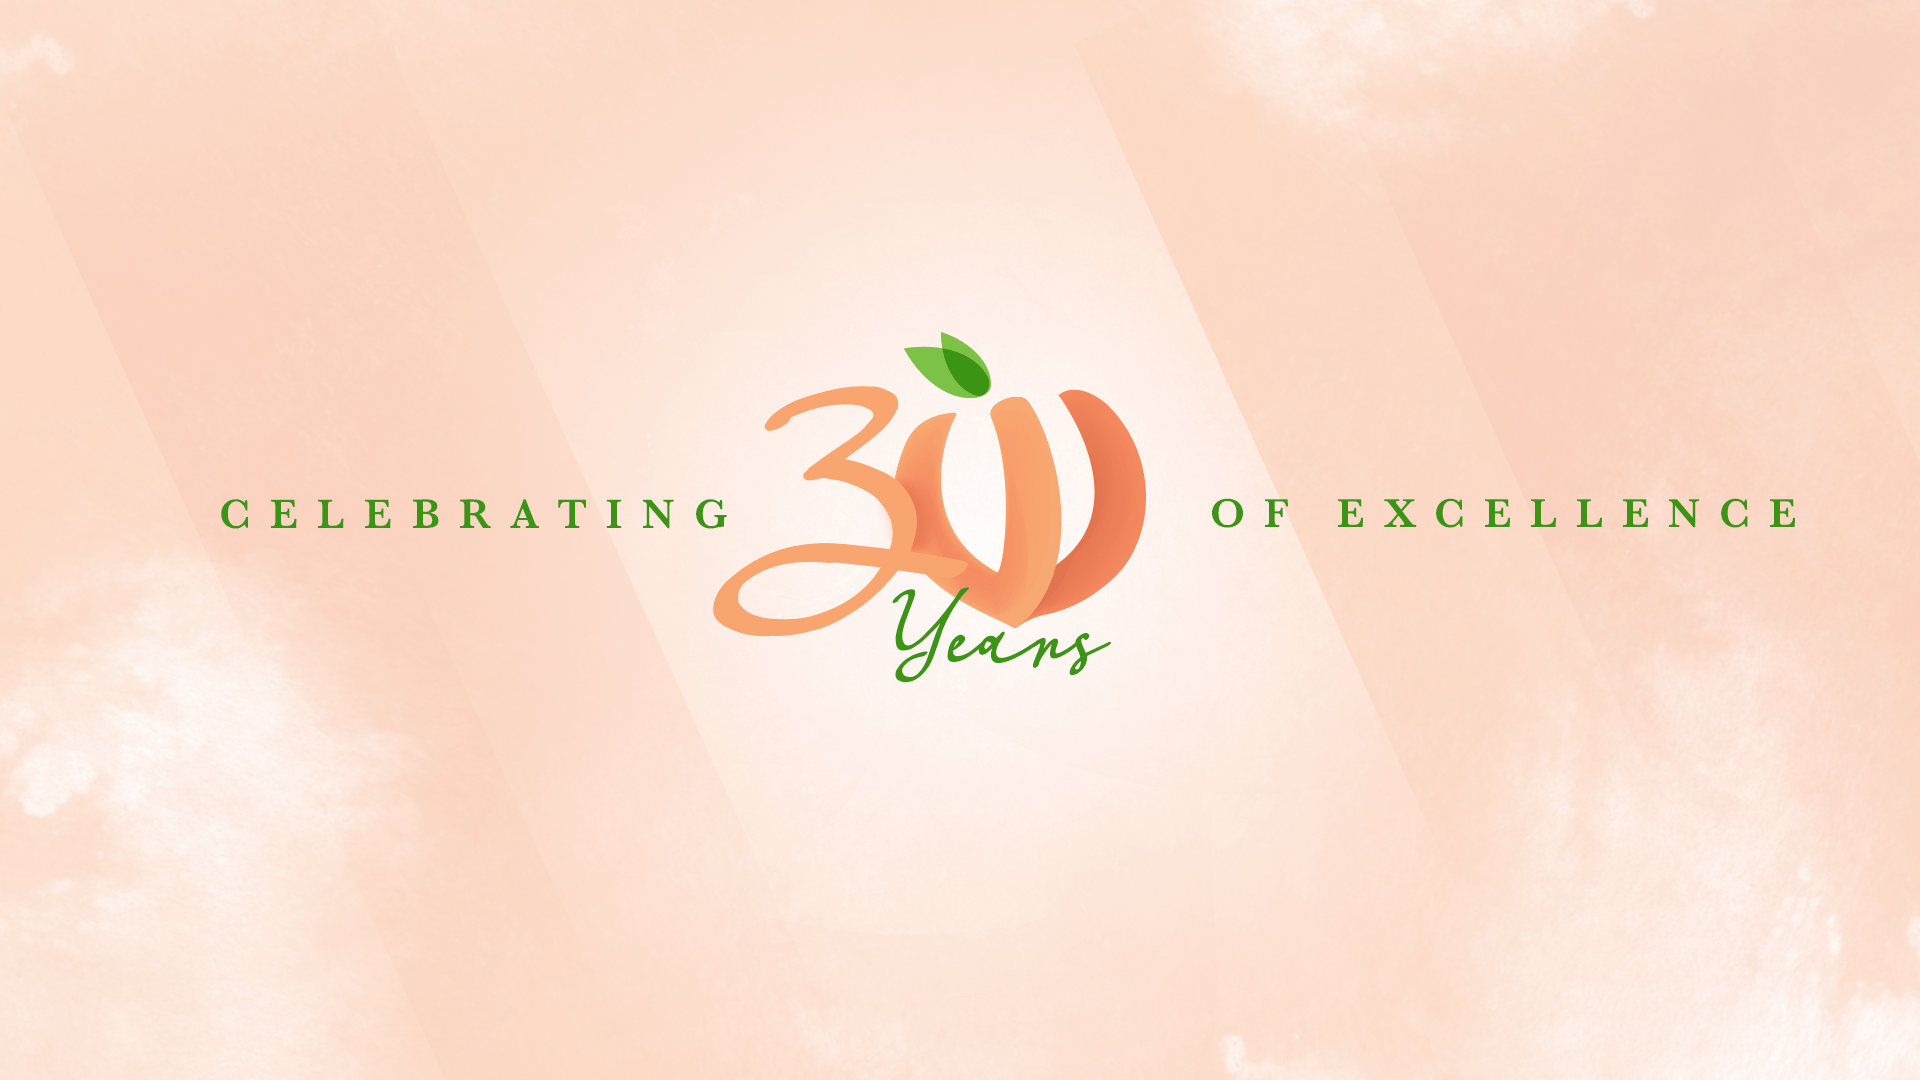 Celebrating 30 Years of Excellence